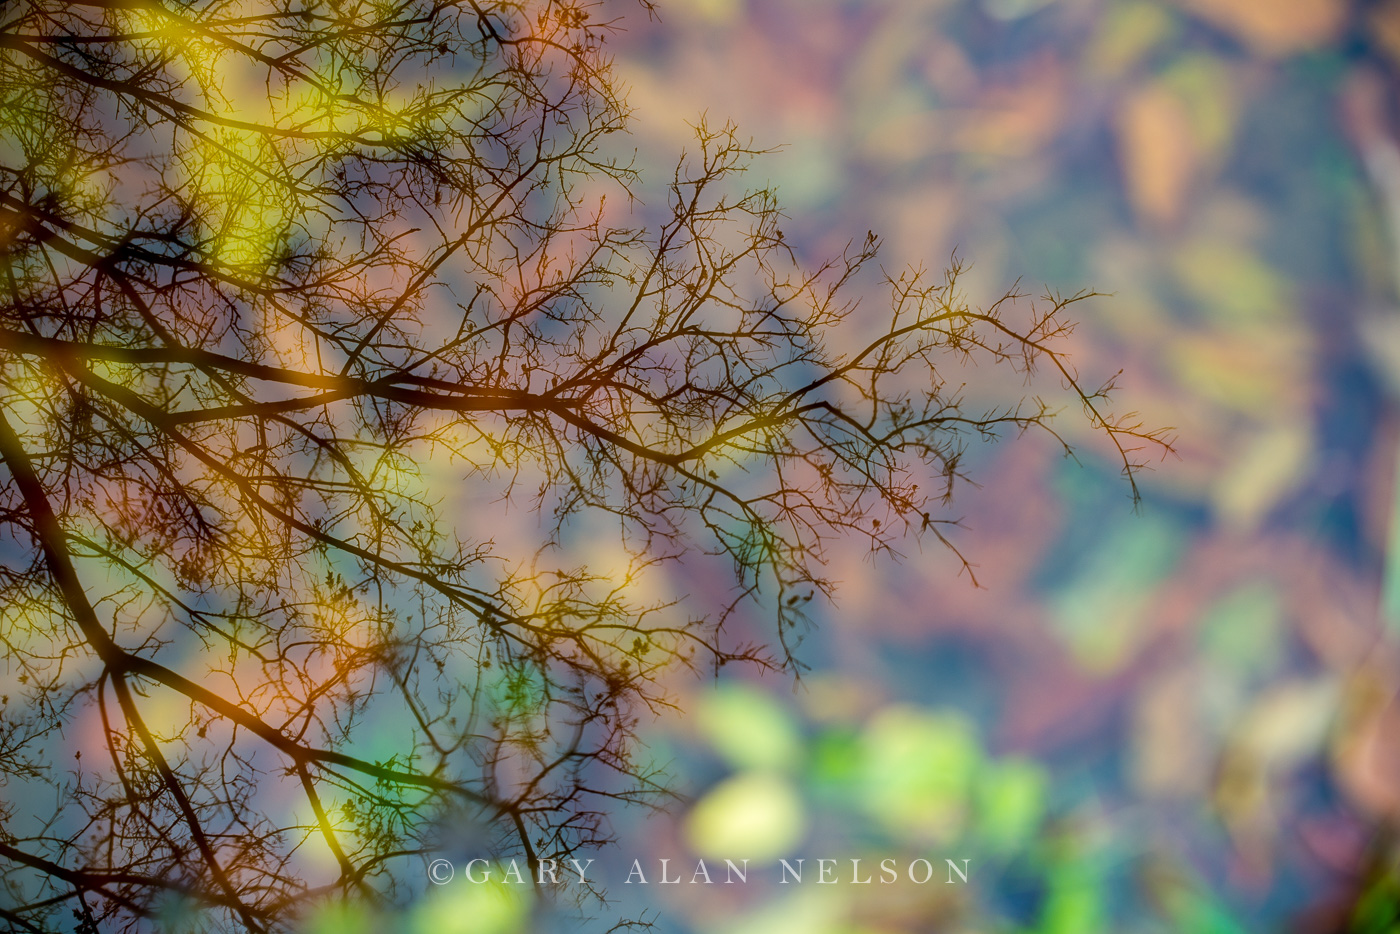 Fallen leaves and tree branches reflecting in a pool of water, Allemansratt Park, Minnesota